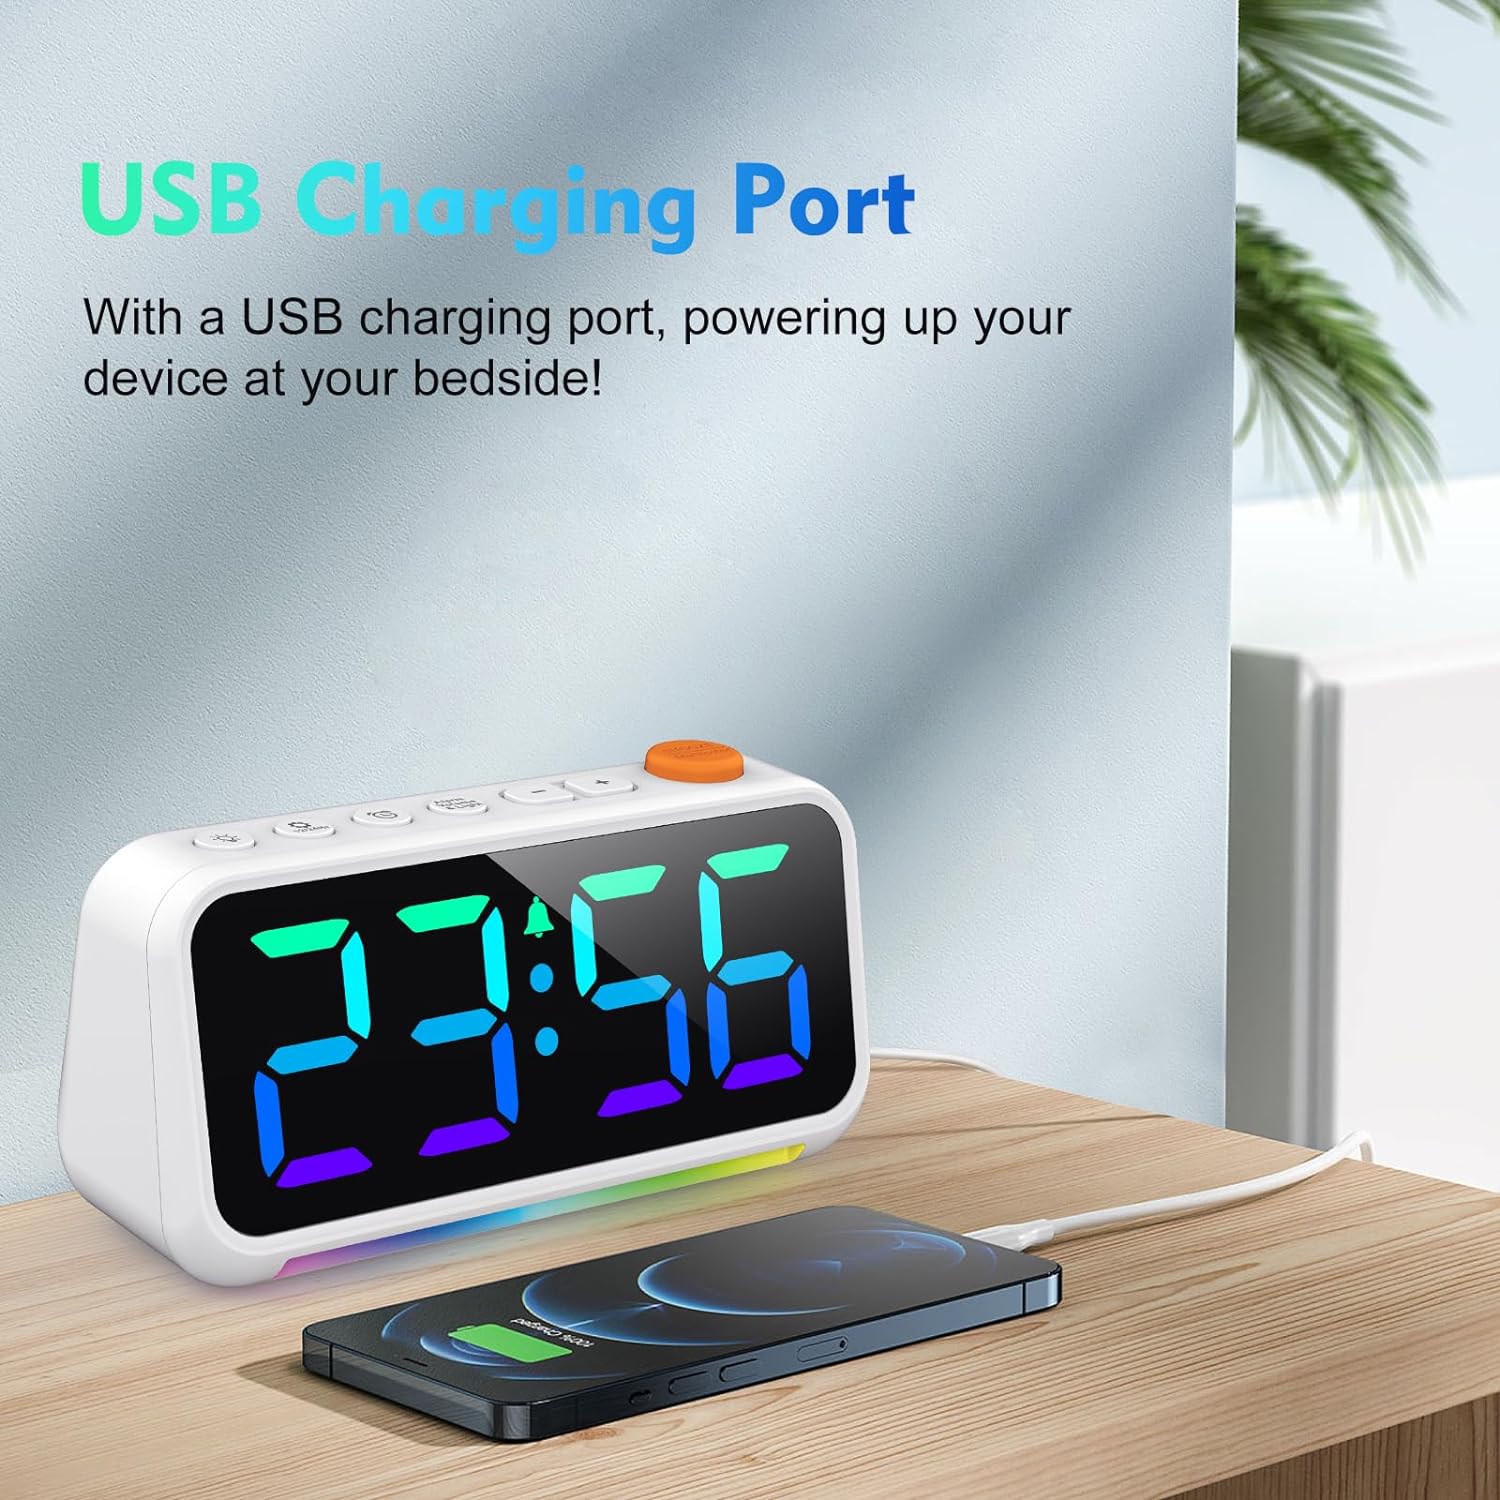 [RGB] Digital Alarm Clock for Bedroom, Dynamic RGB Color Changing, 7 Color Night Light, 3 Alarm Types, Adjustable Snooze Function, with USB Charger Port and Dimmer, for Kids, Teens, Heavy Sleepers